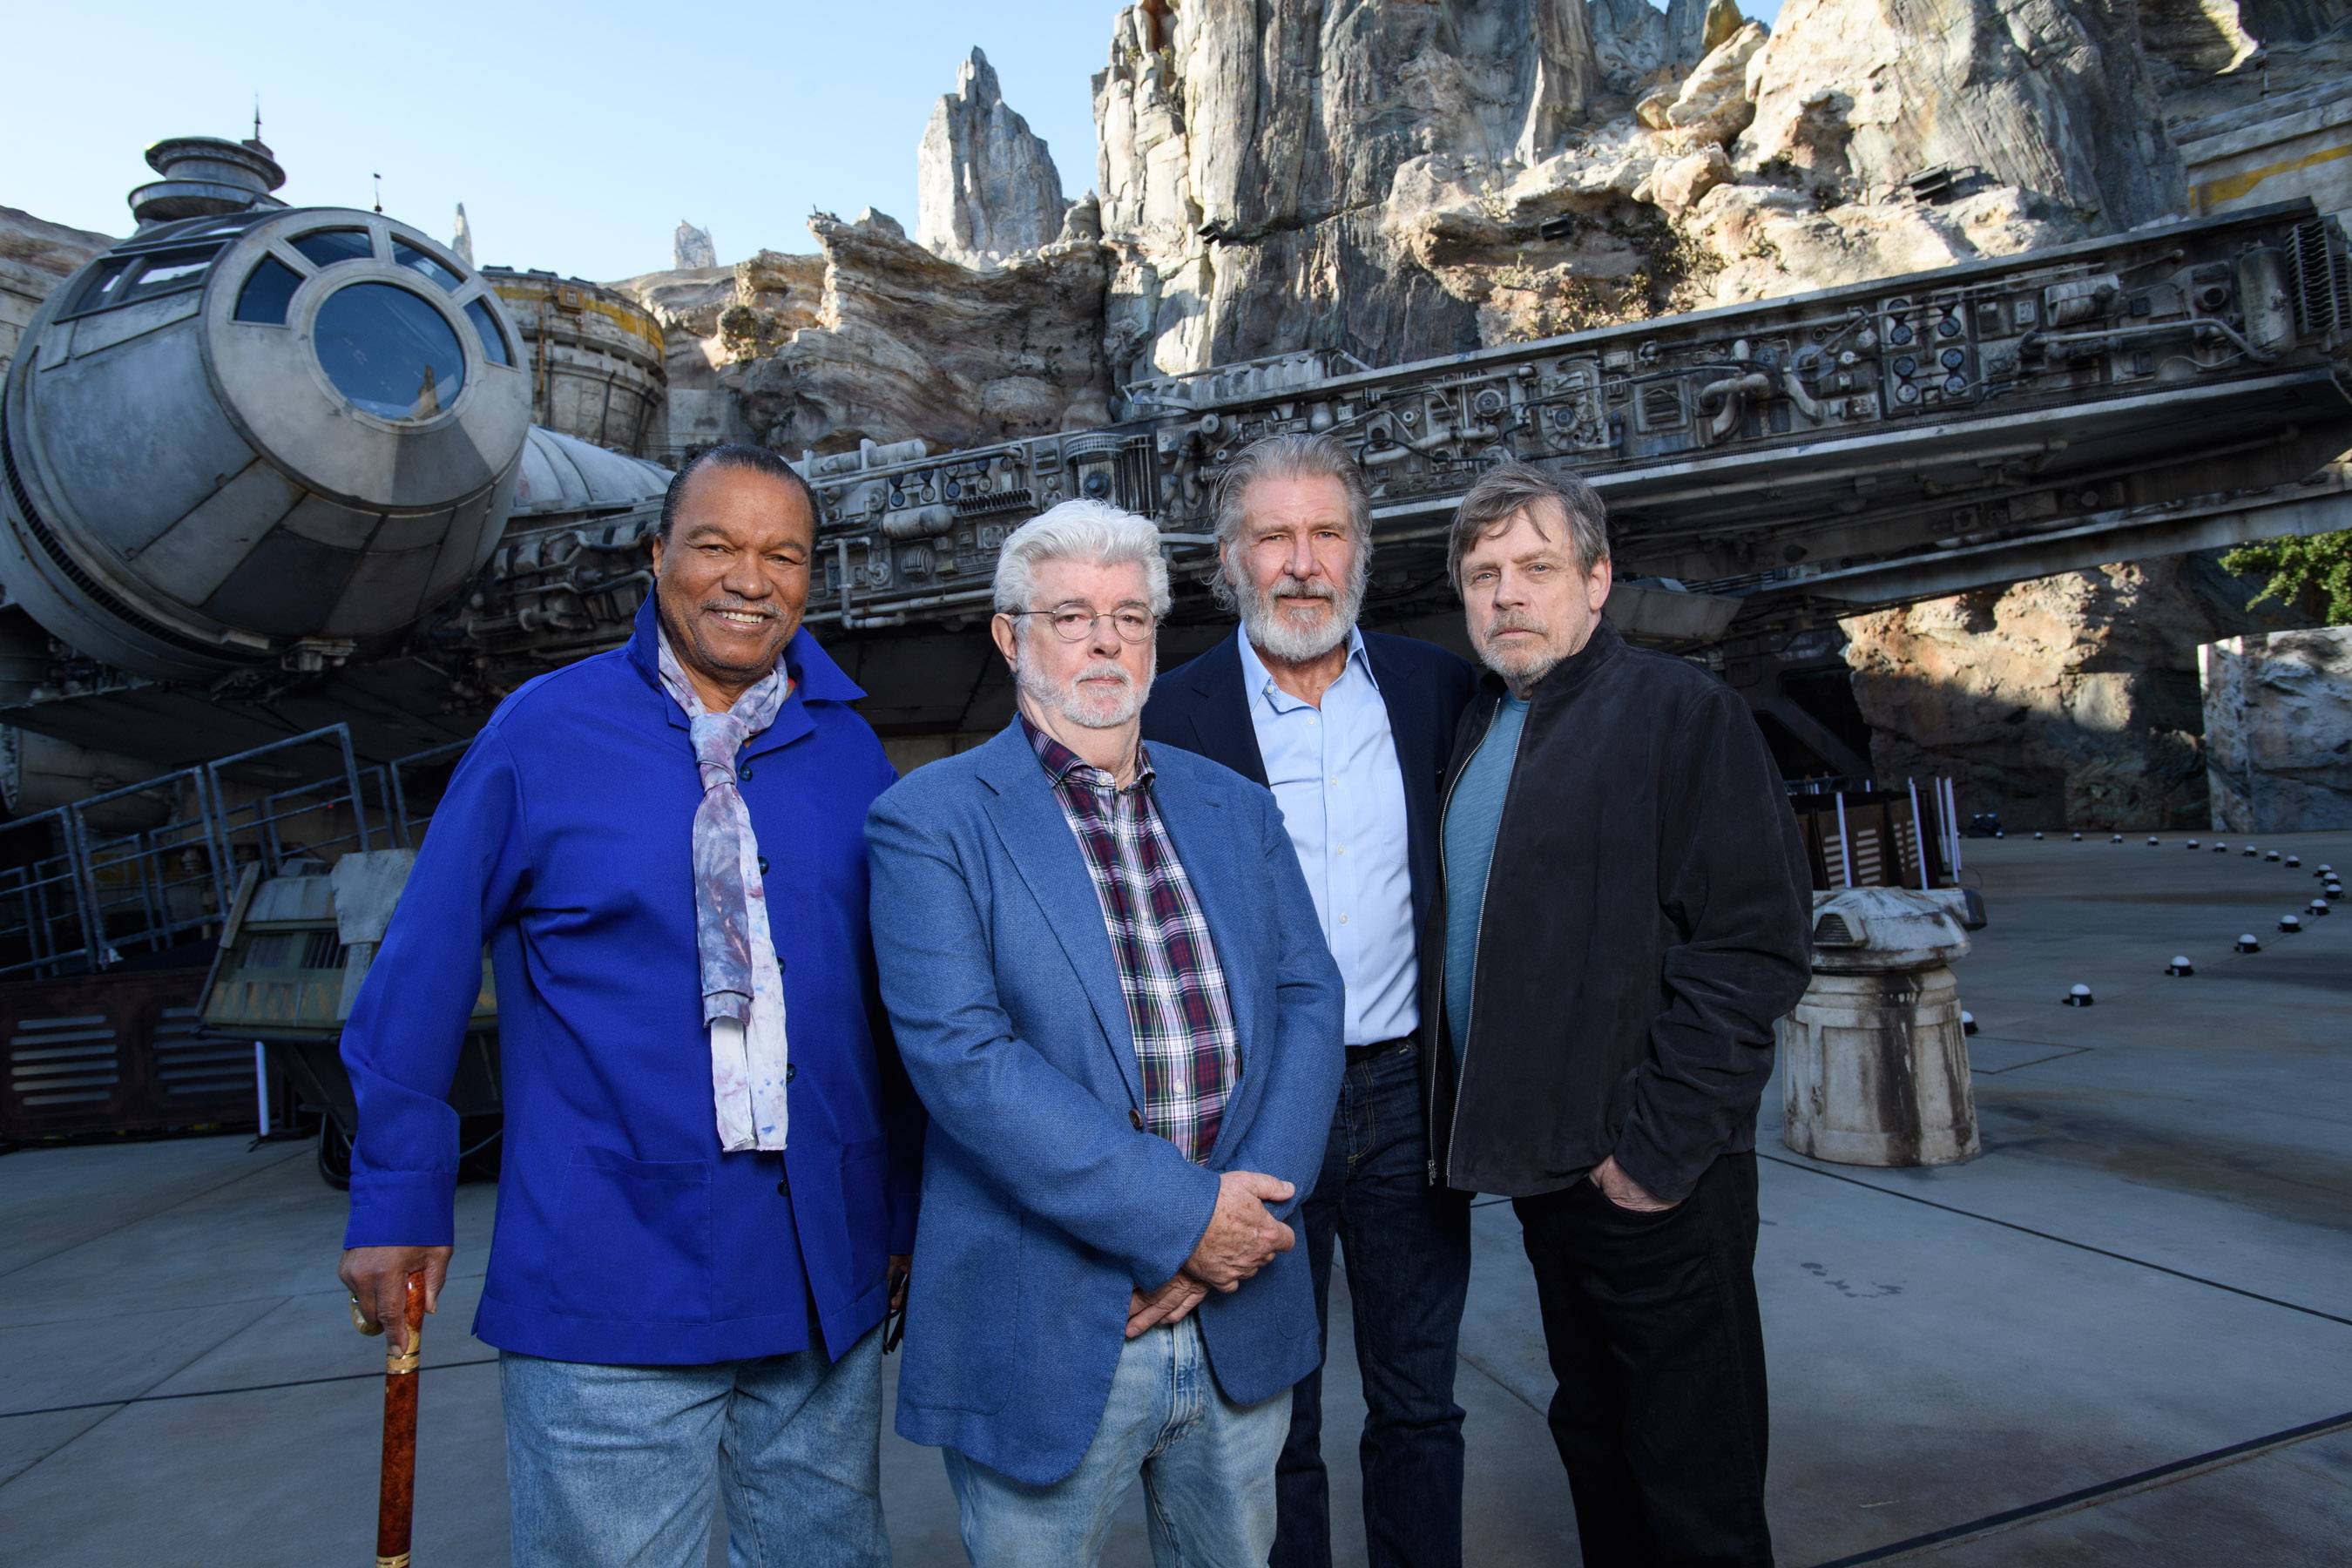 Actor Billy Dee Williams, Star Wars creator George Lucas, actors Harrison Ford and Mark Hamill pose in front of the Millennium Falcon at Star Wars: Galaxy’s Edge at Disneyland